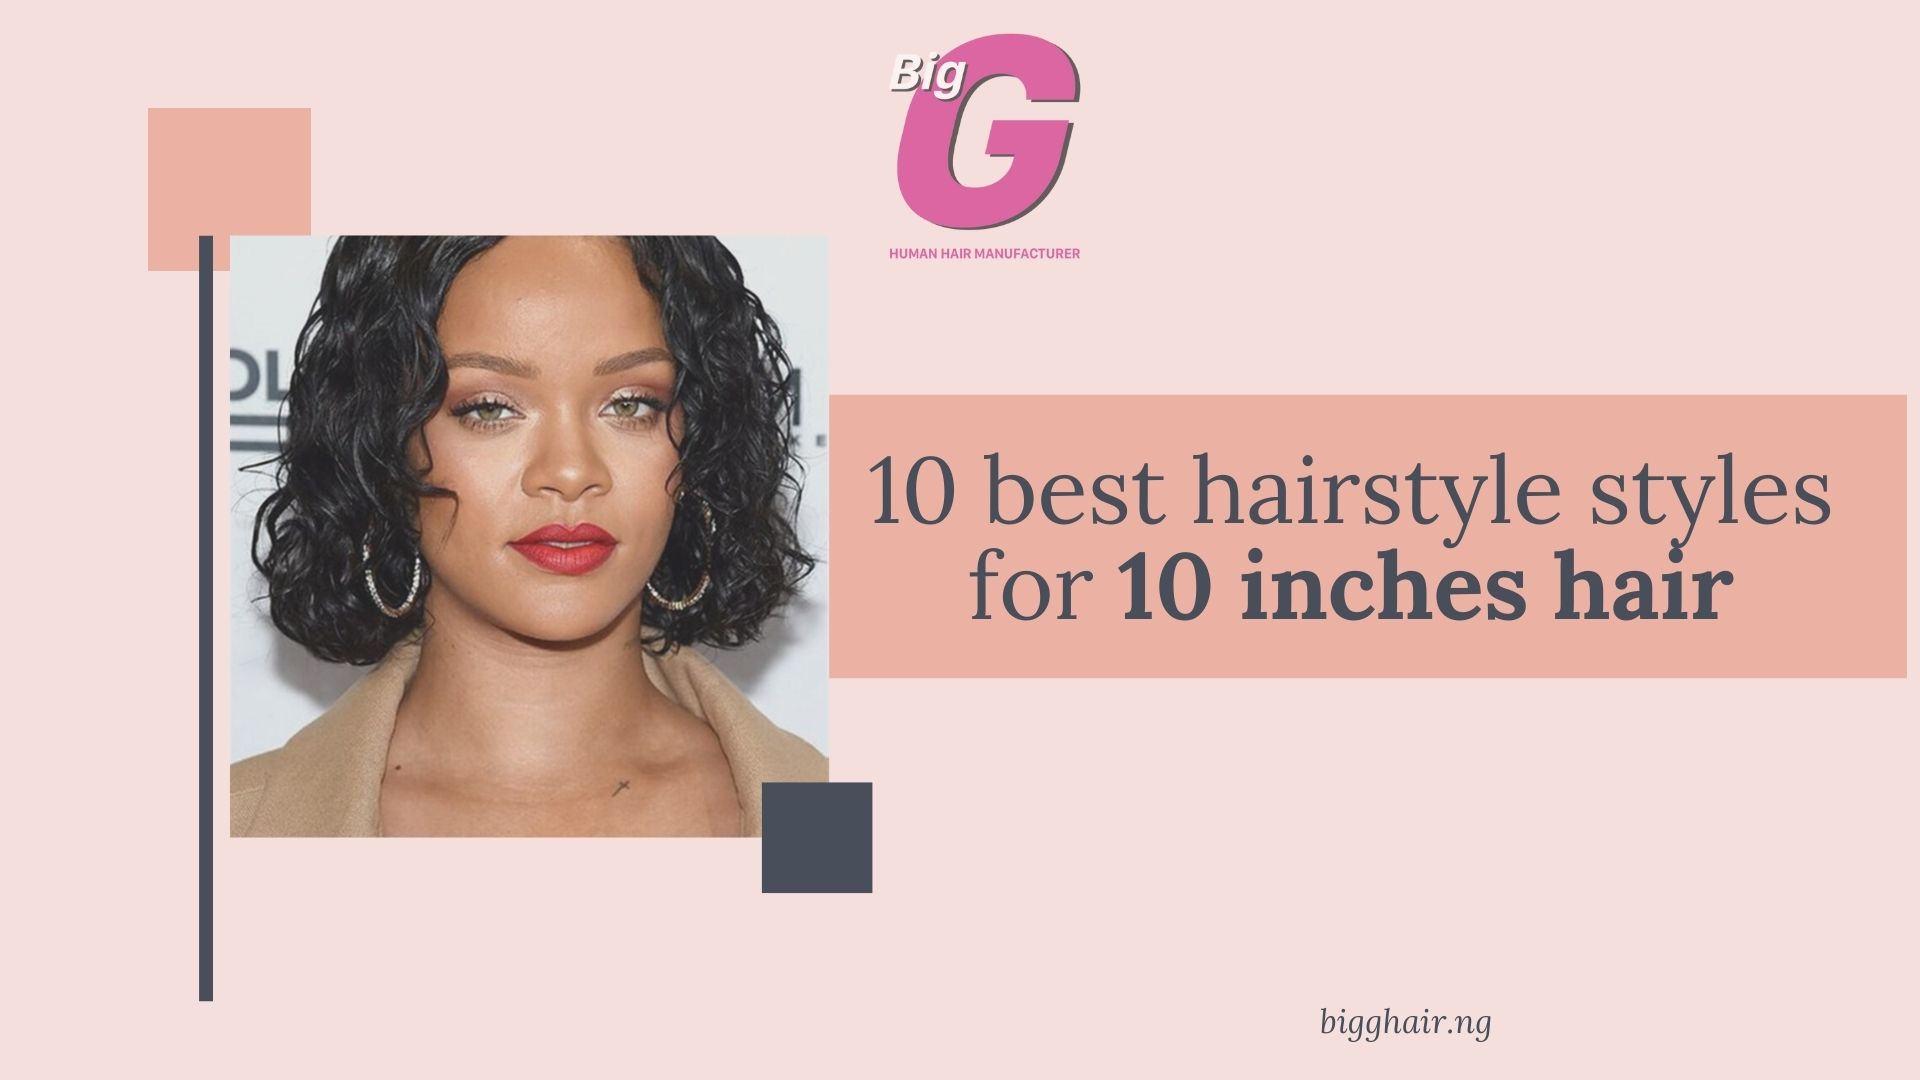 10 irresistible hairstyles for 10 inches hair